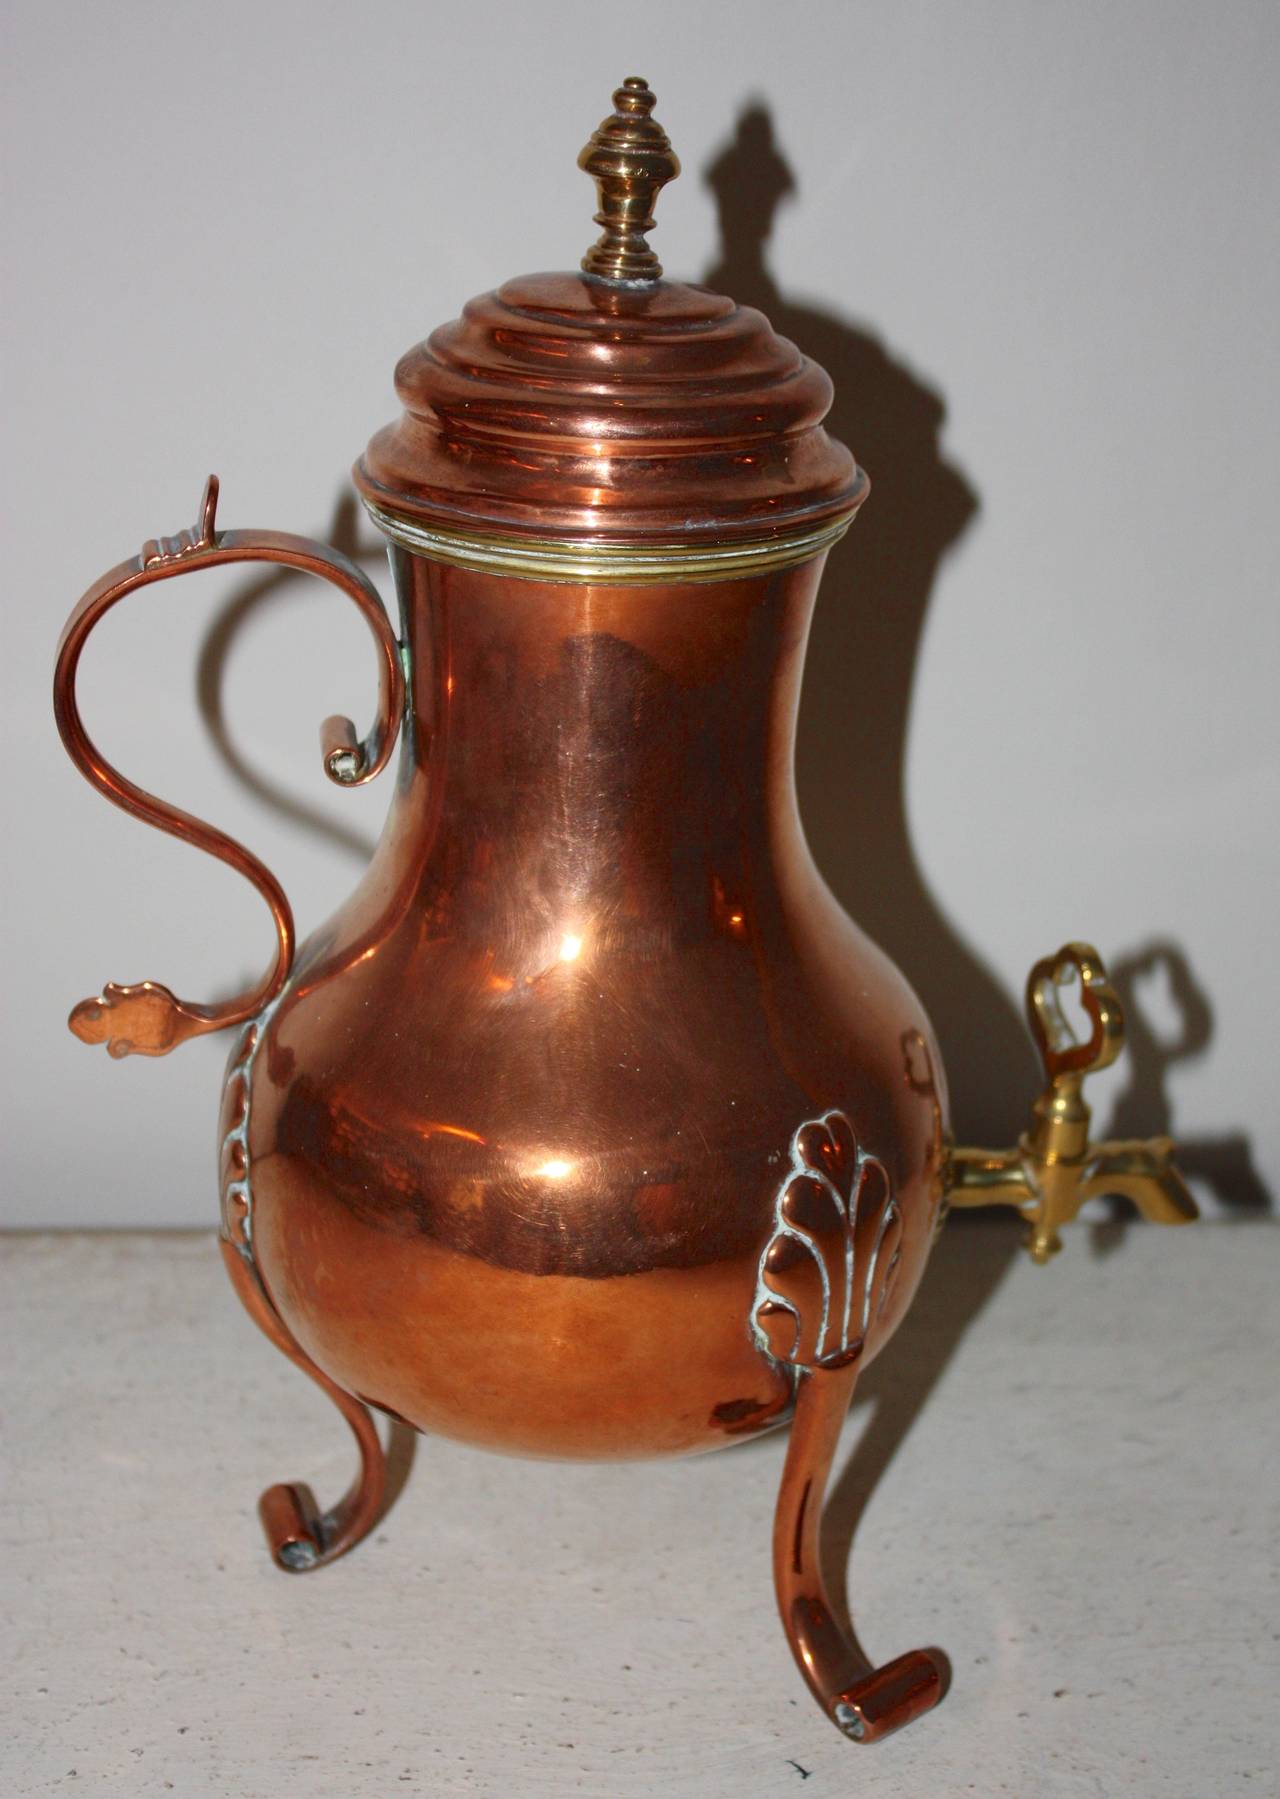 Very nice, not to large, Rococo samovar in copper with brass lining and nozzle.